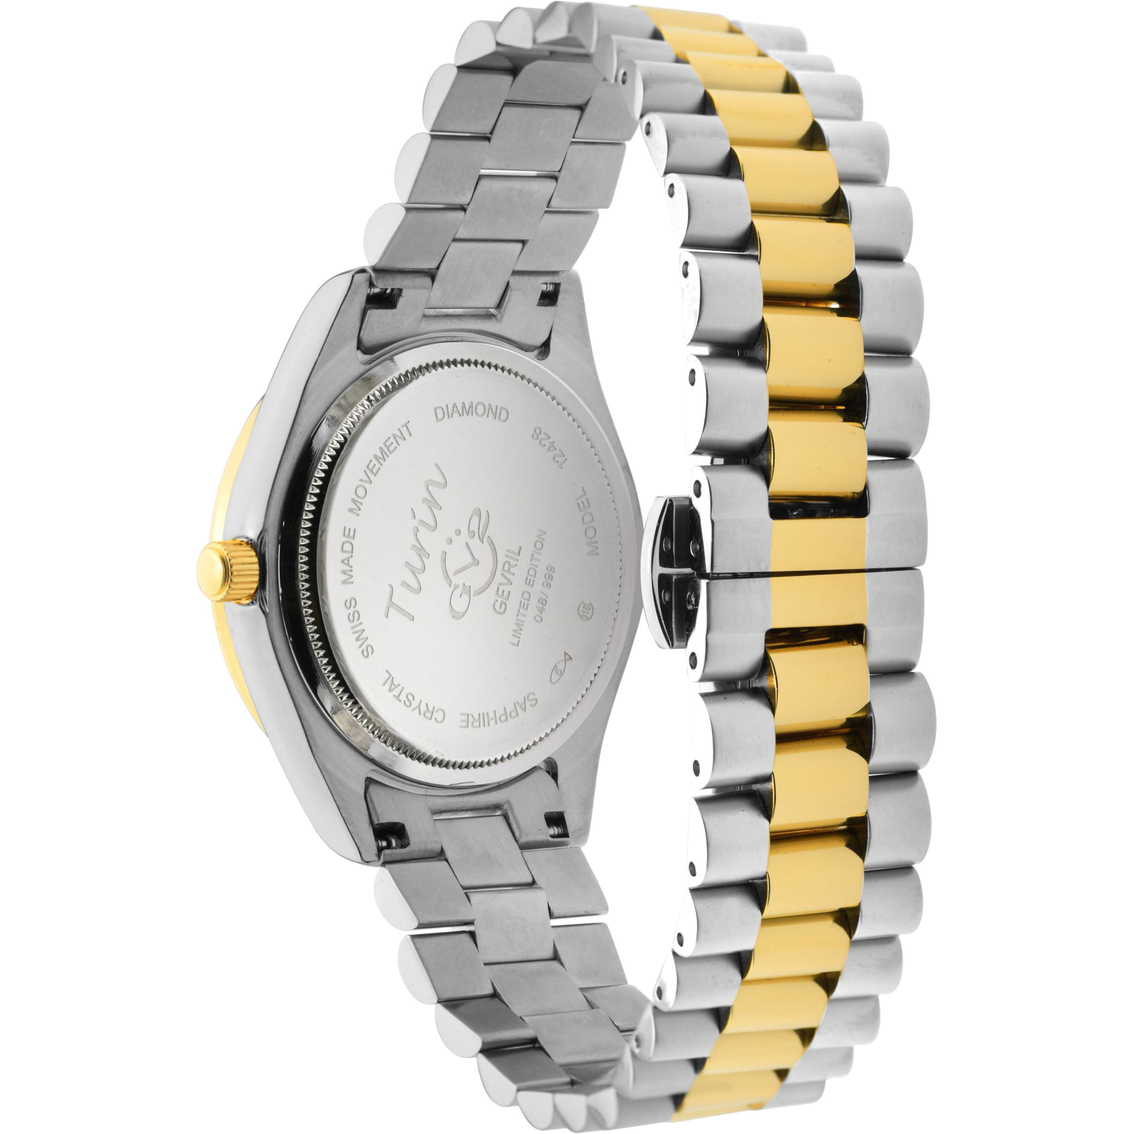 Gevril GV2 Women's Turin Diamond White MOP Dial IPRG SS Watch 1242 - Image 2 of 3